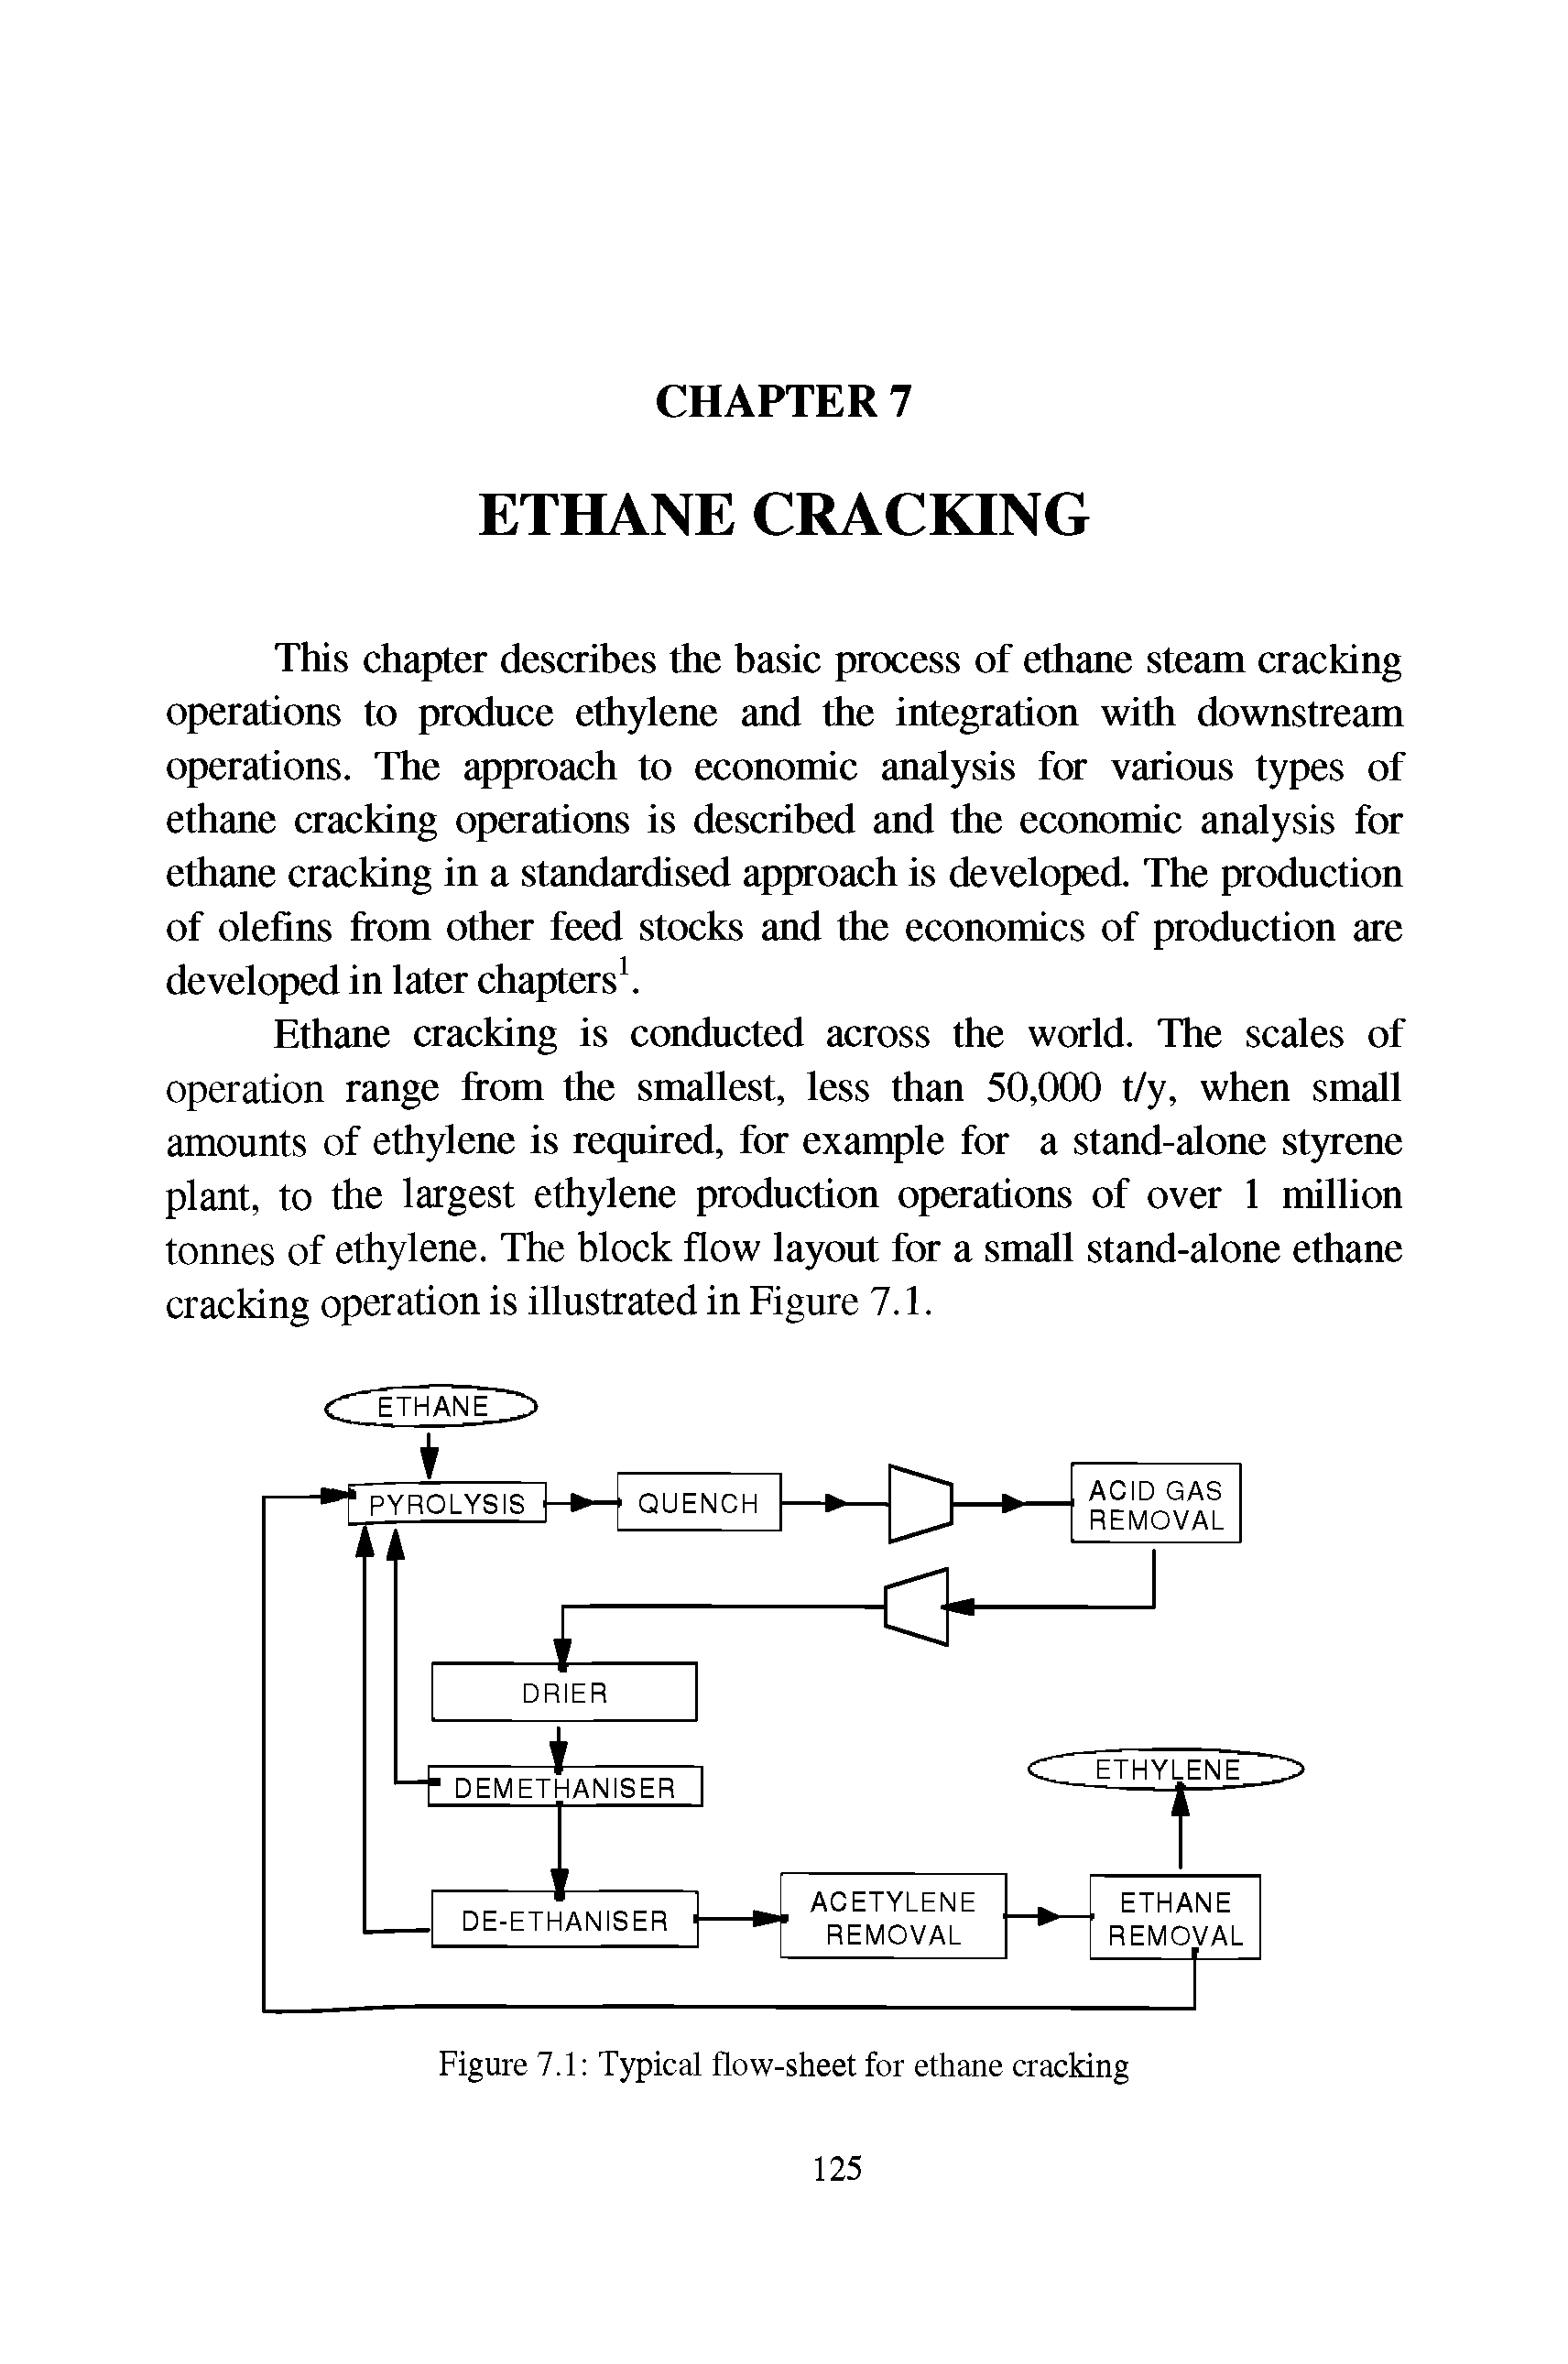 Figure 7.1 Typical flow-sheet for ethane cracking...